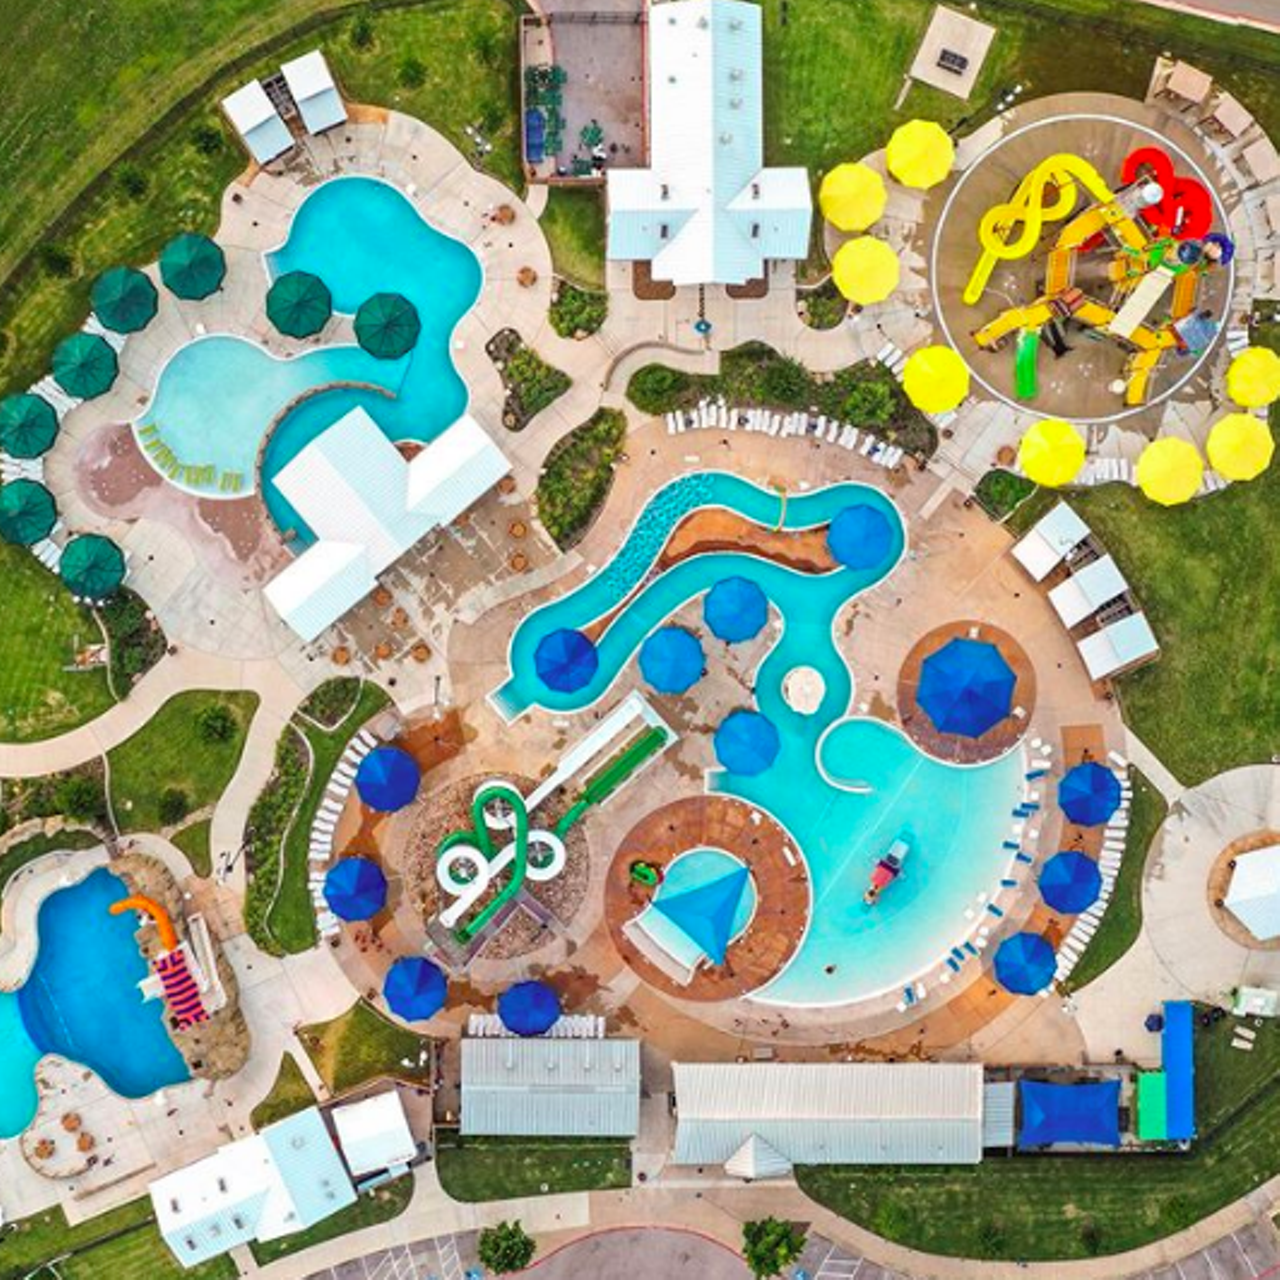 Rock’n River Water Park
3300 E Palm Valley Blvd, Round Rock, (512) 218-5540, roundrocktexas.gov
Just up the road in Round Rock you’ll find a family-friendly water park that has fun for everyone. With a lazy river, water playgrounds, slides for days and tipping buckets that douse you in water, it’s hard not to find an attraction that will get your soaked and keep you having fun all day long.
Photo via Instagram / mikeboudreaux